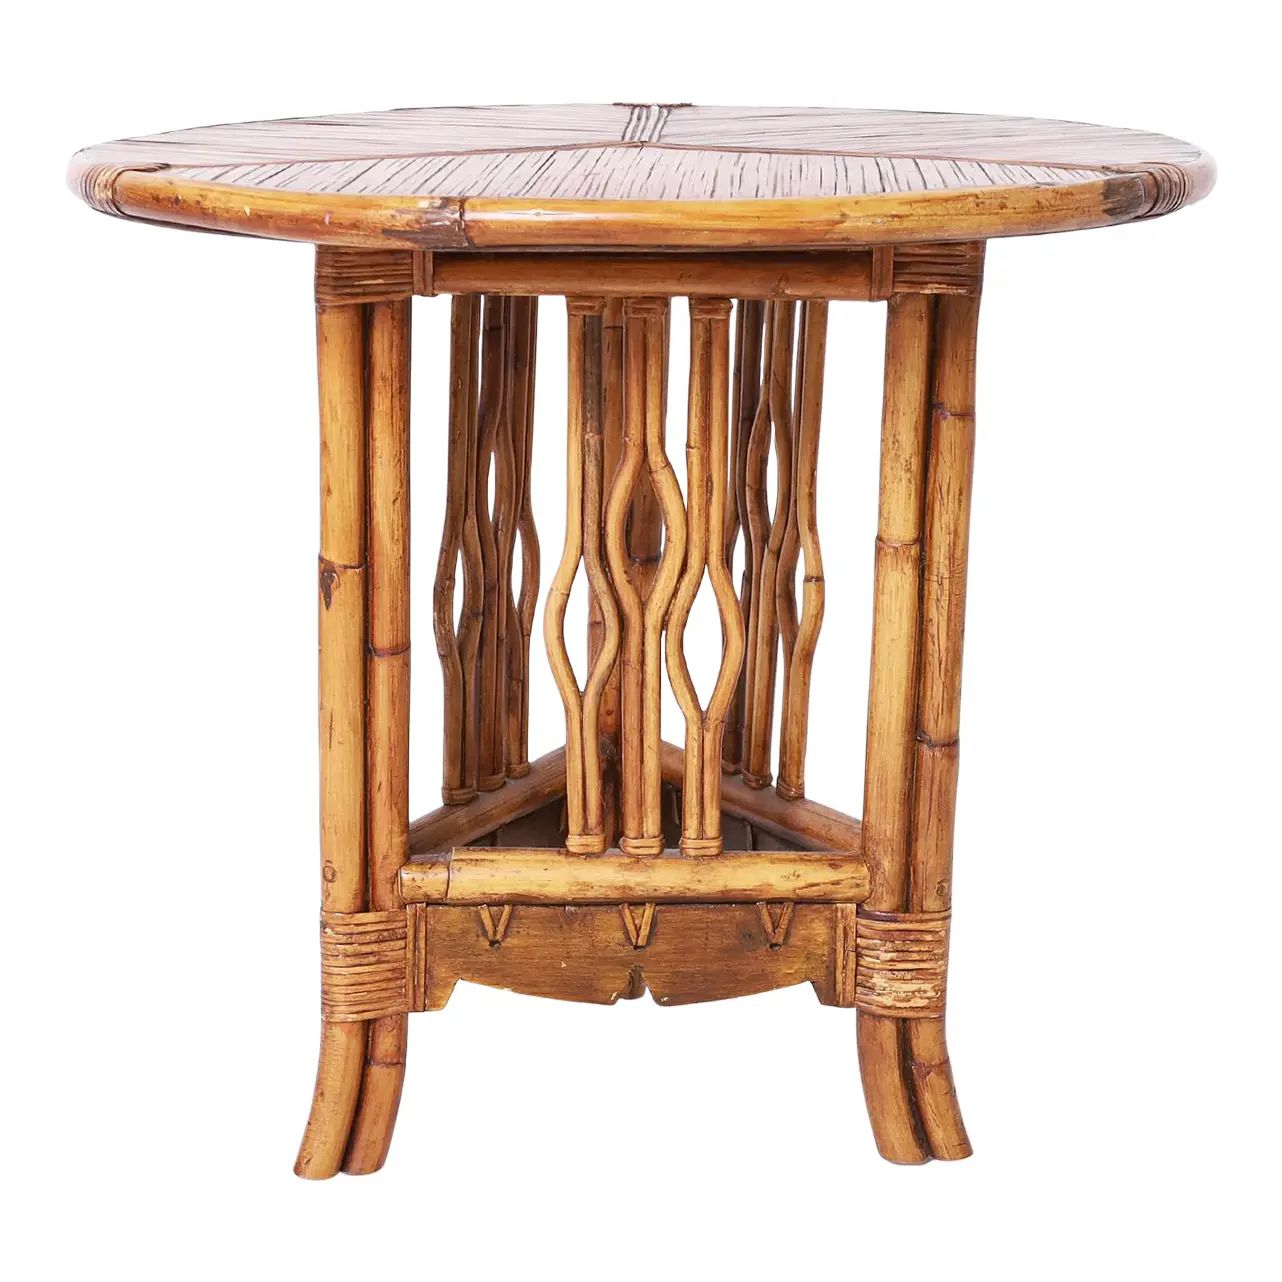 1970s Bamboo British Colonial Style Table by Palecek | Chairish